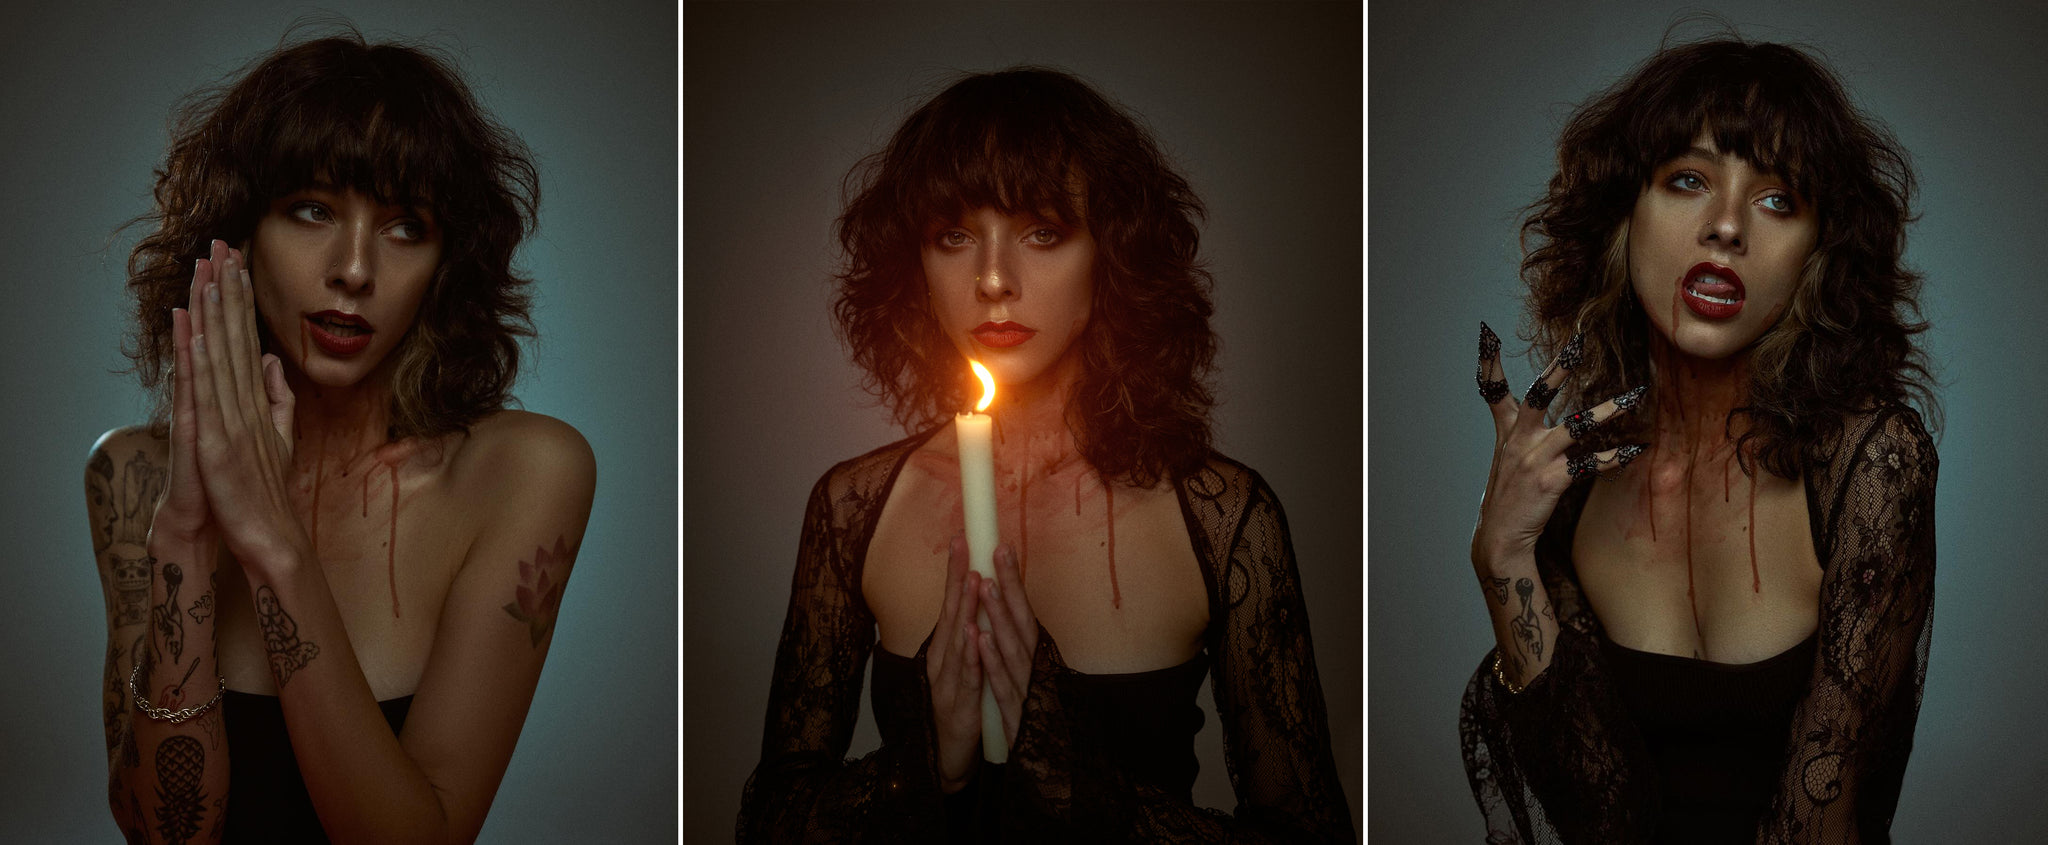 halloween inspired photography by jacklyn lund candle vampire using color toning actions by onlythecurious